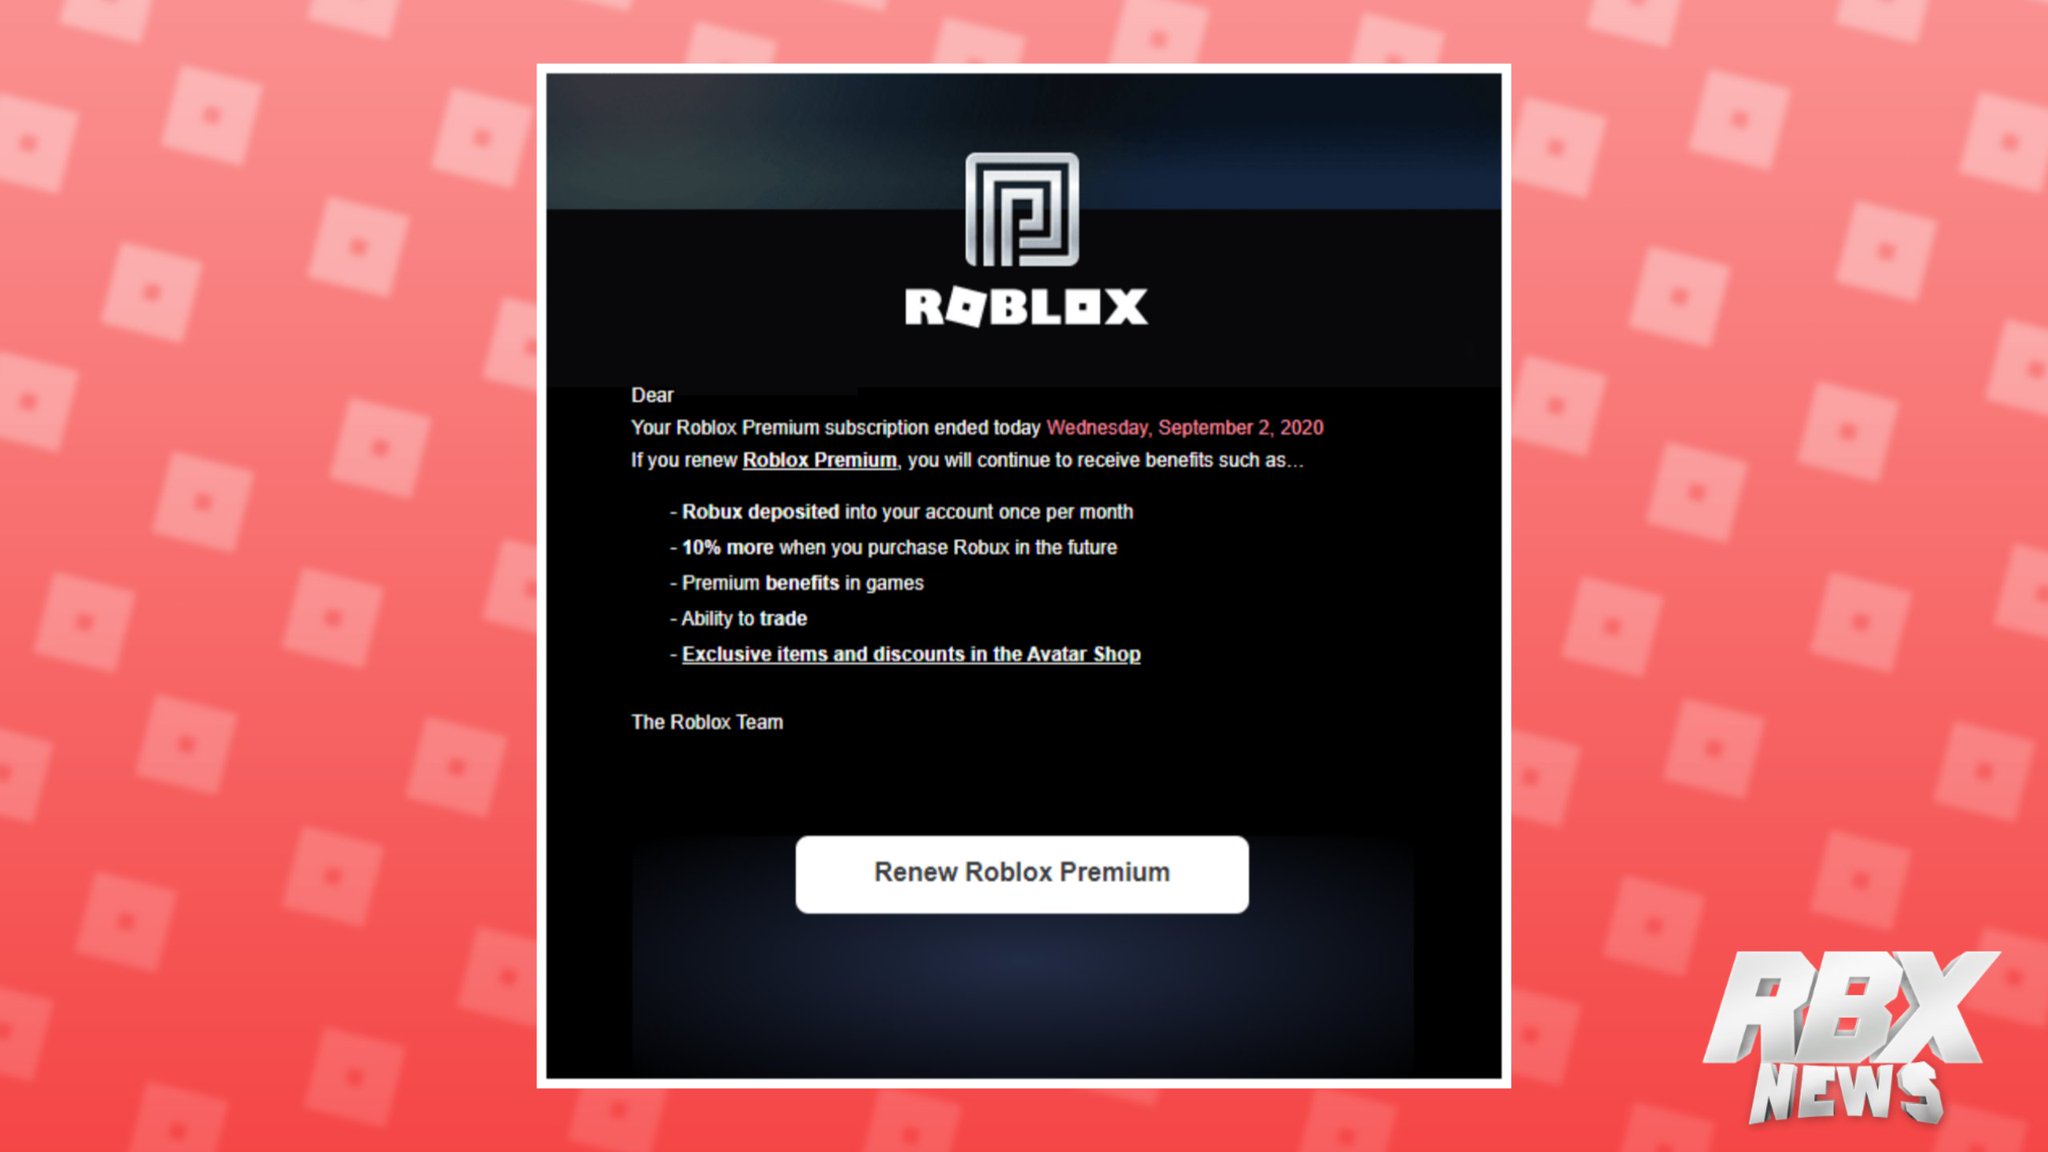 Rbxnews On Twitter Alongside A New Roblox Premium Page Https T Co Riuzj4vvl4 It Appears That Roblox Has Updated The Premium Cancellation Email Image Via Kensizovoid Https T Co Apccchehr7 - roblox games with premium benefits